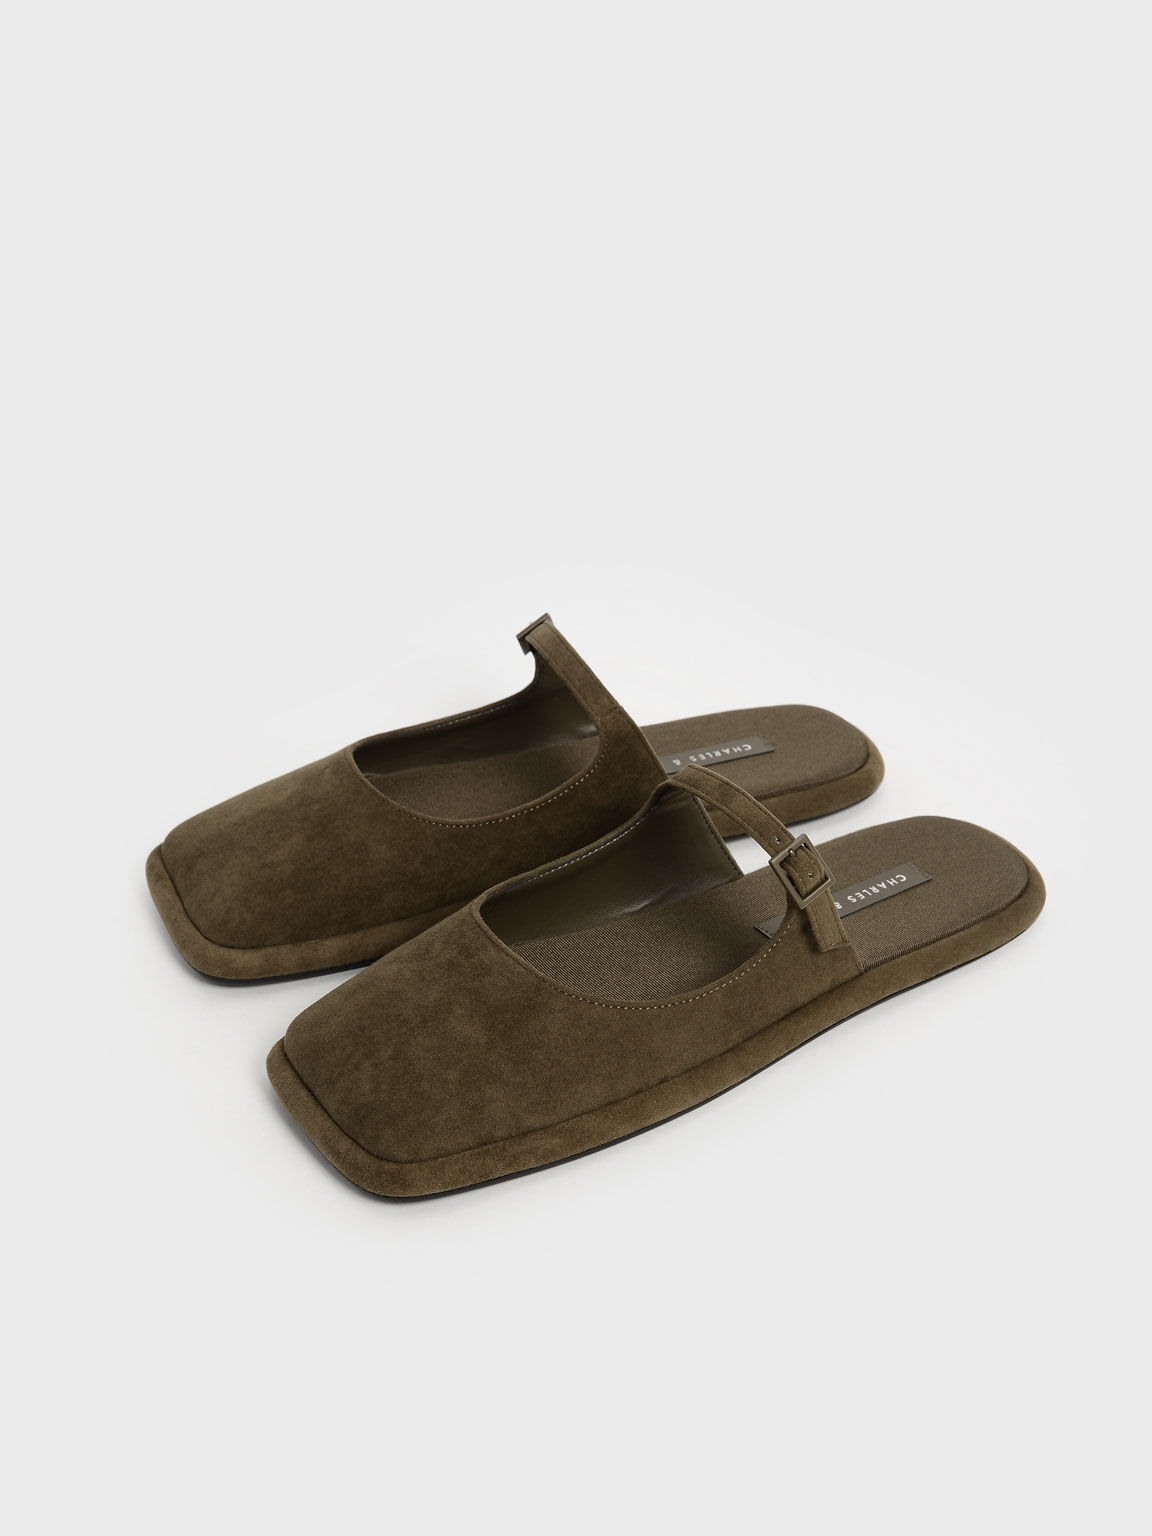 Olive Textured Square-Toe Flat Mules - CHARLES & KEITH International